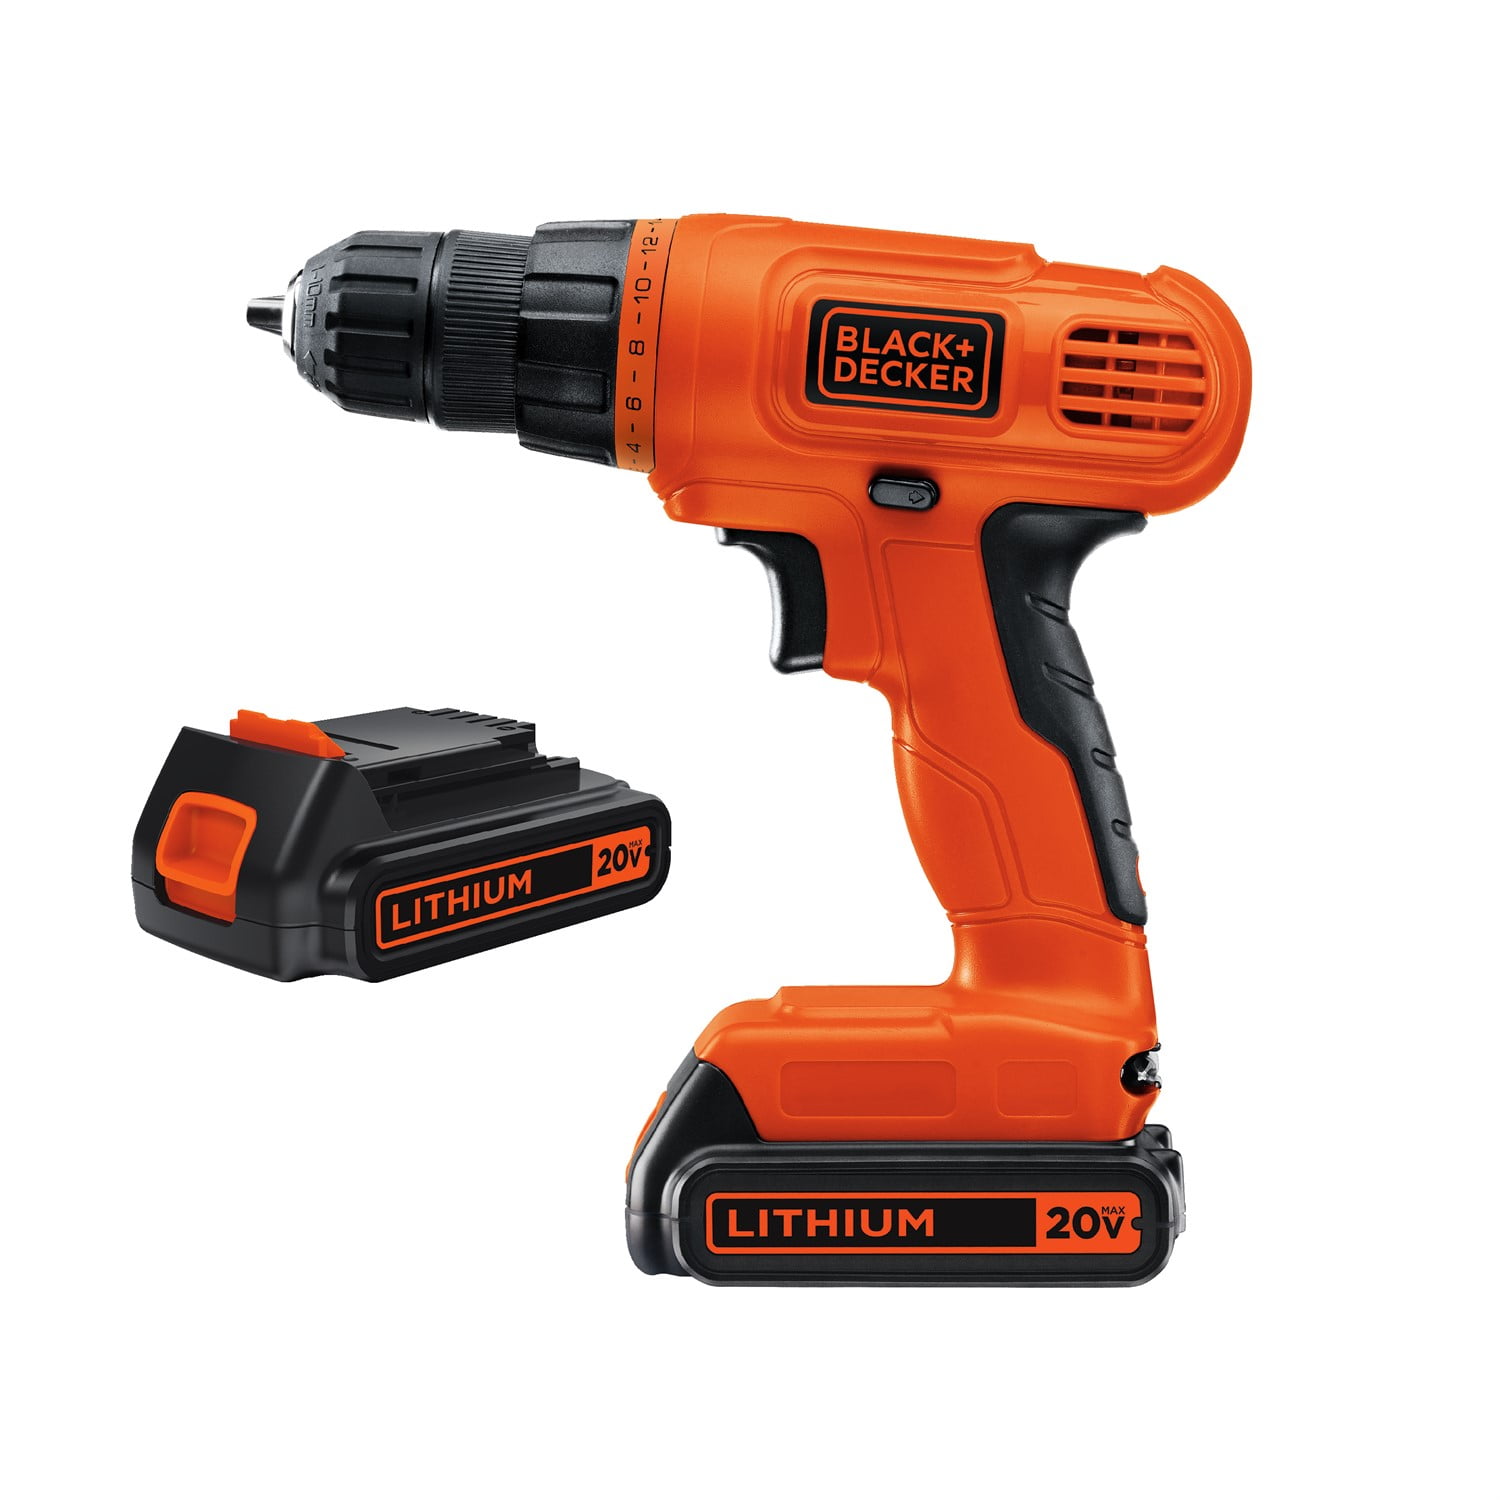 Black + Decker 20 Max Volt Lithium Ion Drill/Driver w/Battery, Charger &  Bit~NEW - BND Treasure Chest